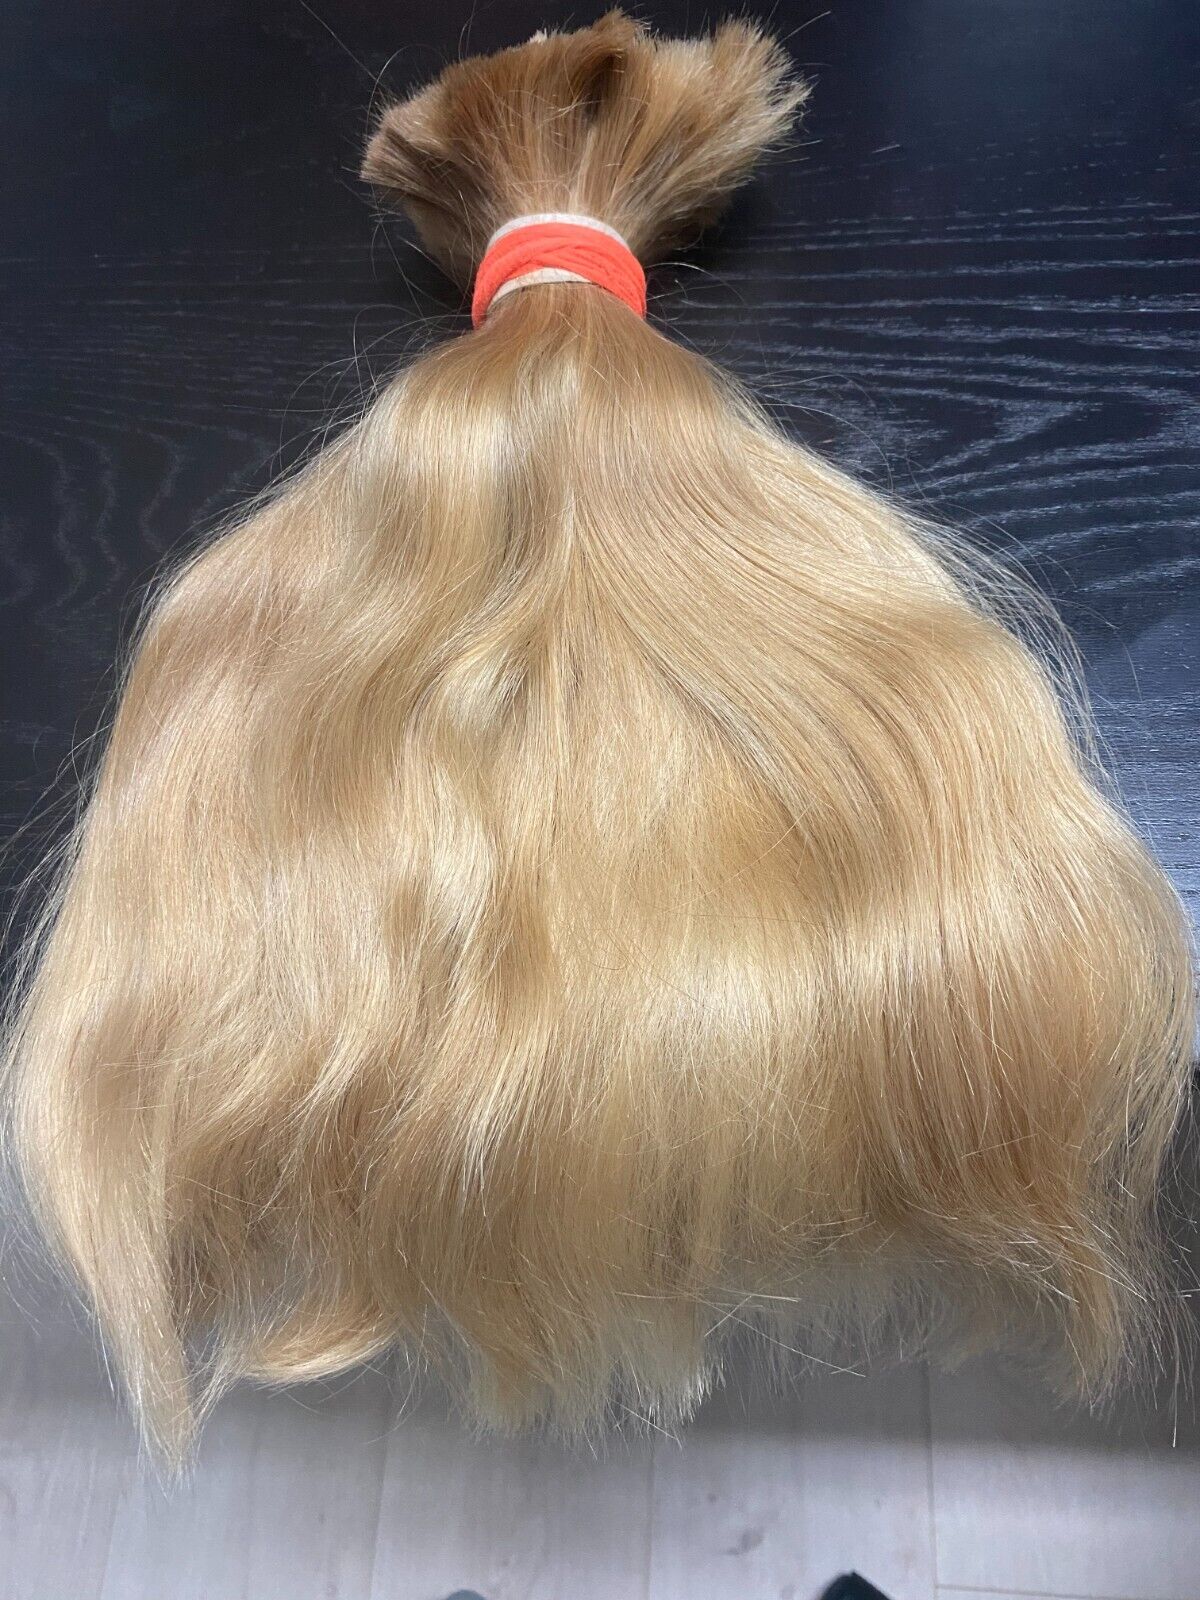 Real Human Hair Cut Thick Ponytail 13 Inch 8 Oz From Woman, Soft Wavy Mix Blonde